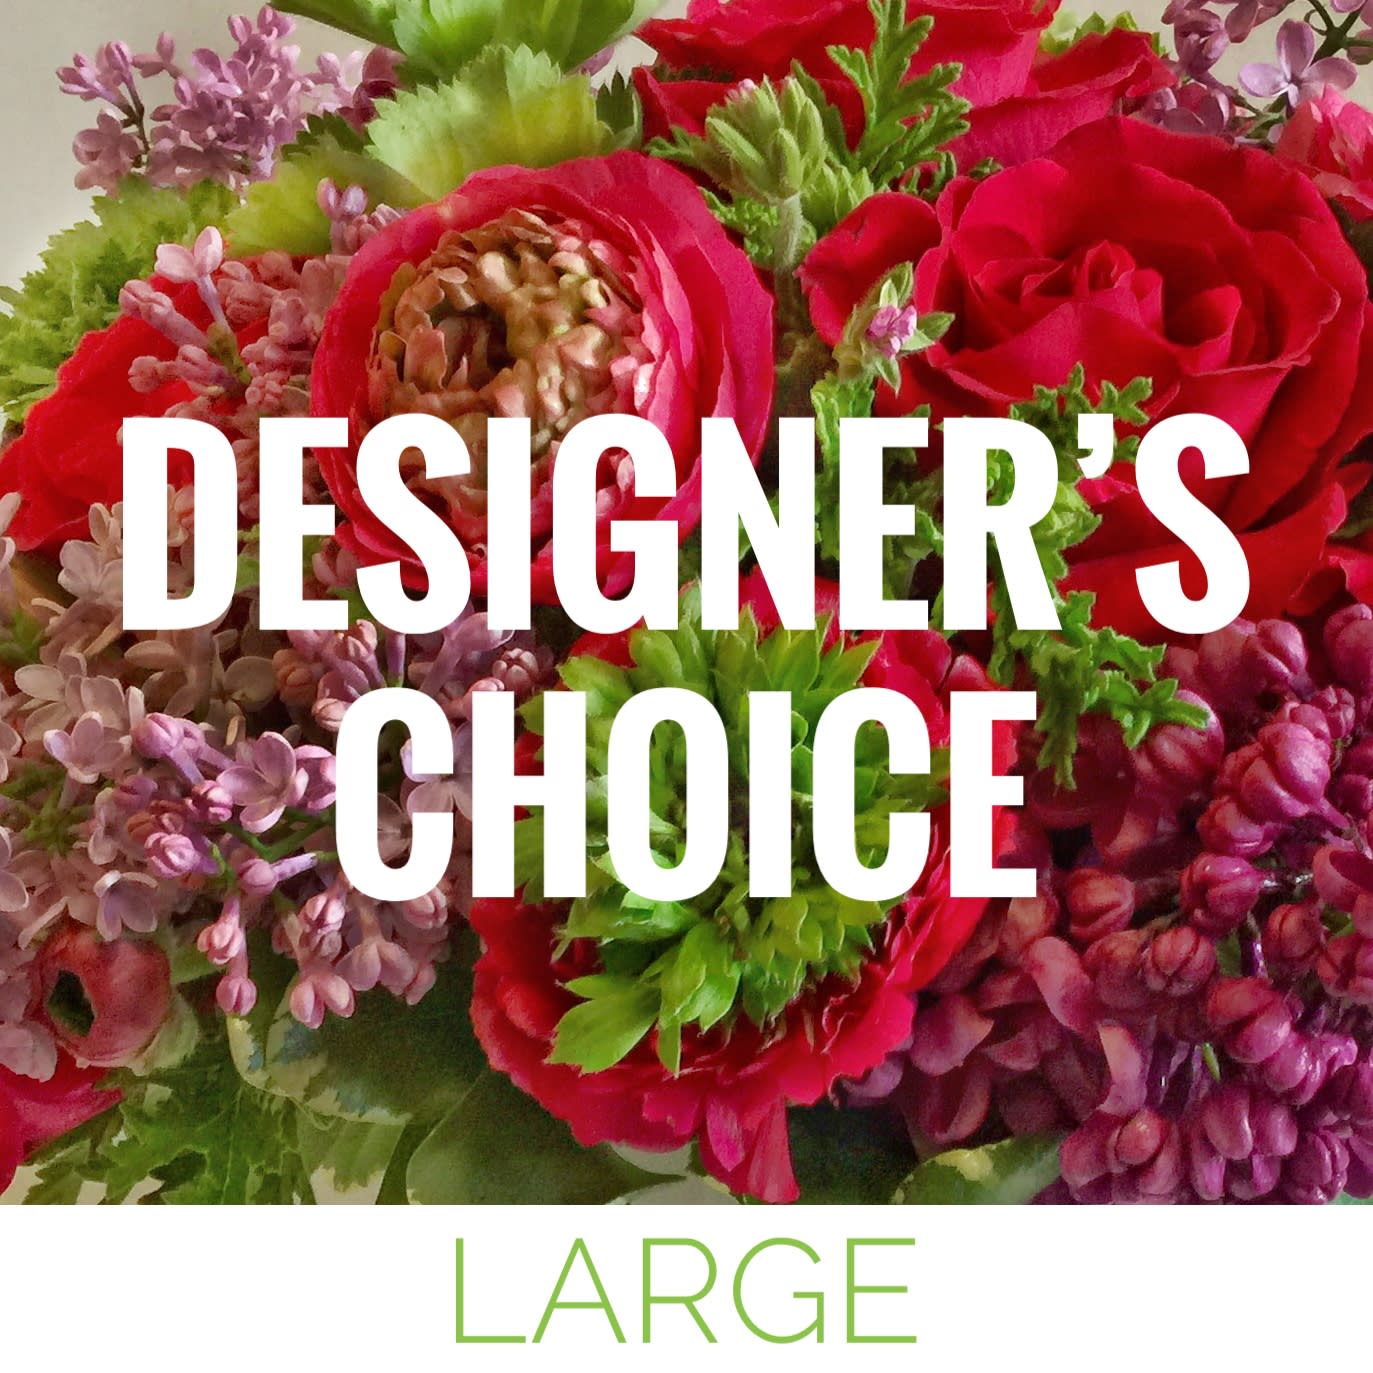 Large desk, coffee table or kitchen table florals - A large arrangement that is appropriately scaled for an office, living room or kitchen. Our designer's choice arrangements are created with seasonal blooms arranged to the chosen value with the occasion in mind. Every week we work with a new our color palette so we have a constantly changing variety of flowers to work with. The freshest seasonal blooms will be used to create your arrangement. If you have special requests, please call us or use our custom arrangements order form.  We are happy to accommodate you. Approximate Size: 11&quot; wide by 11&quot; tall  Additional photos are examples of past floral arrangements that we have done to give you an idea of size and style. Actual arrangements will vary with the season, our weekly color palette and the flowers that we have on hand.